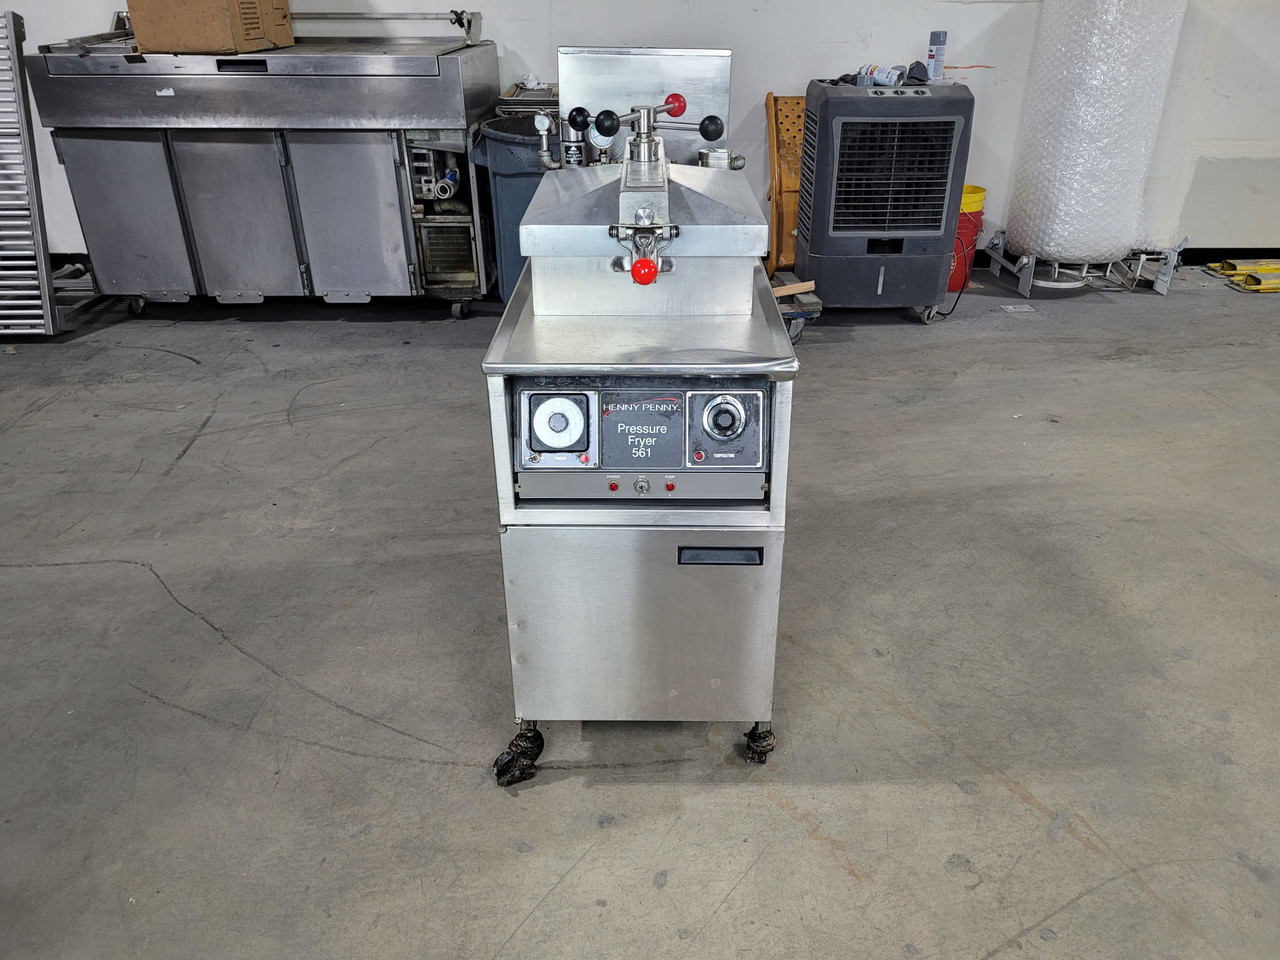 Henny Penny Commercial Pressure Fryers